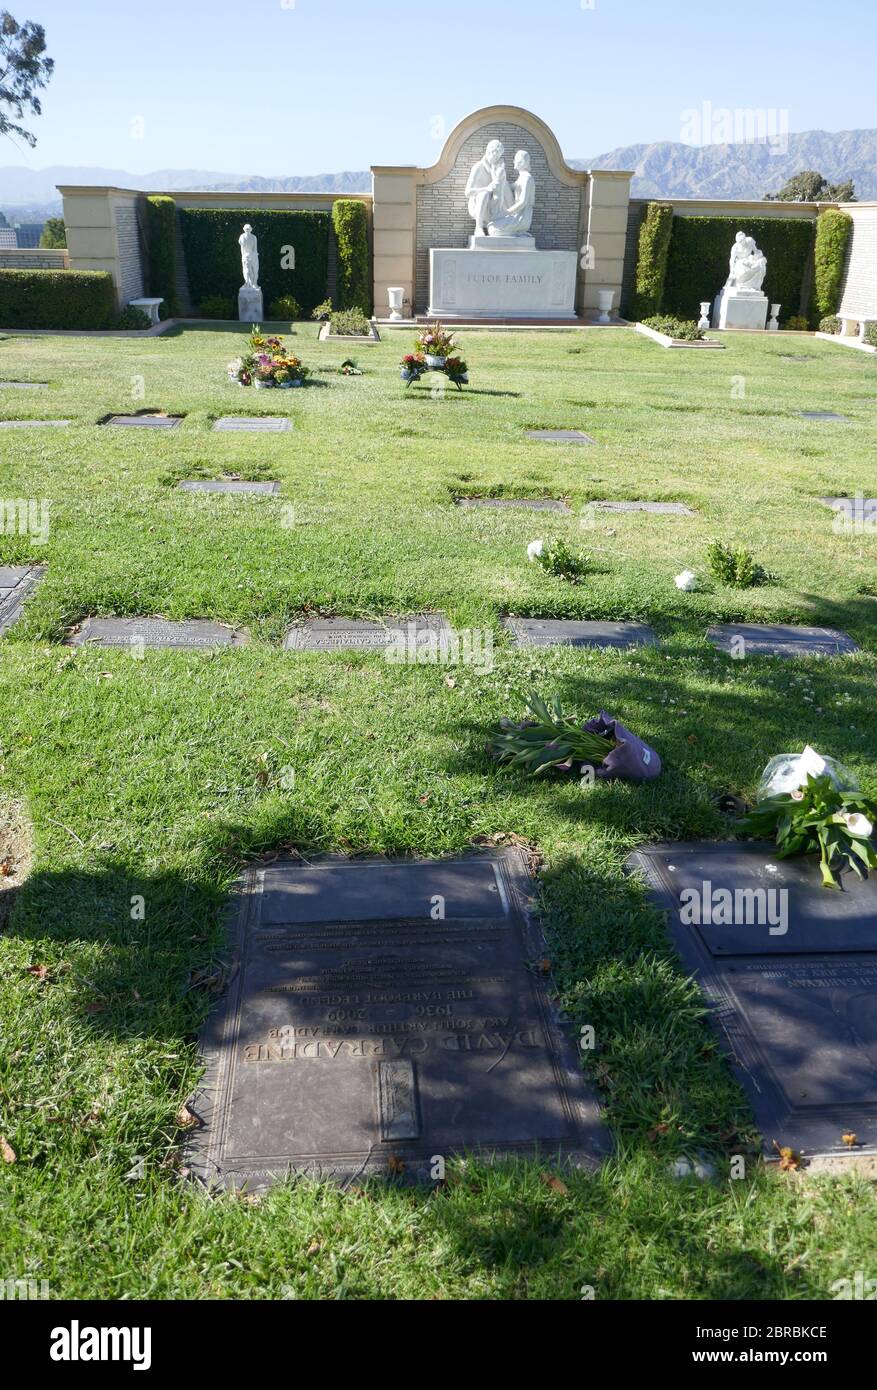 Los Angeles, California, USA 20th May 2020 A general view of atmosphere of David Carradine's grave at Forest Lawn Memorial Park on May 20, 2020 in Los Angeles, California, USA. Photo by Barry King/Alamy Stock Photo Stock Photo